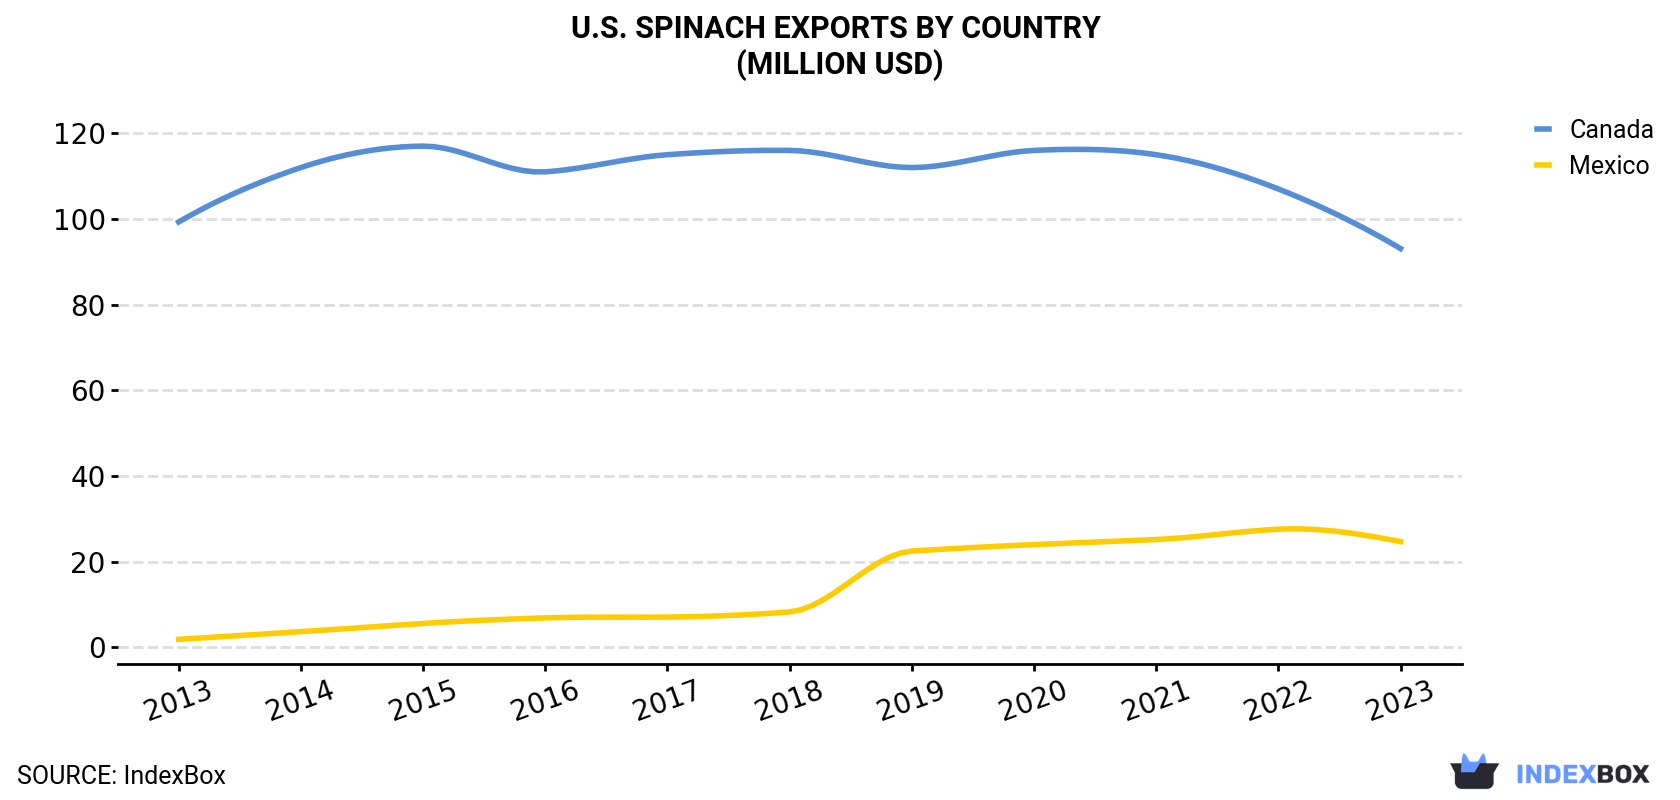 U.S. Spinach Exports By Country (Million USD)